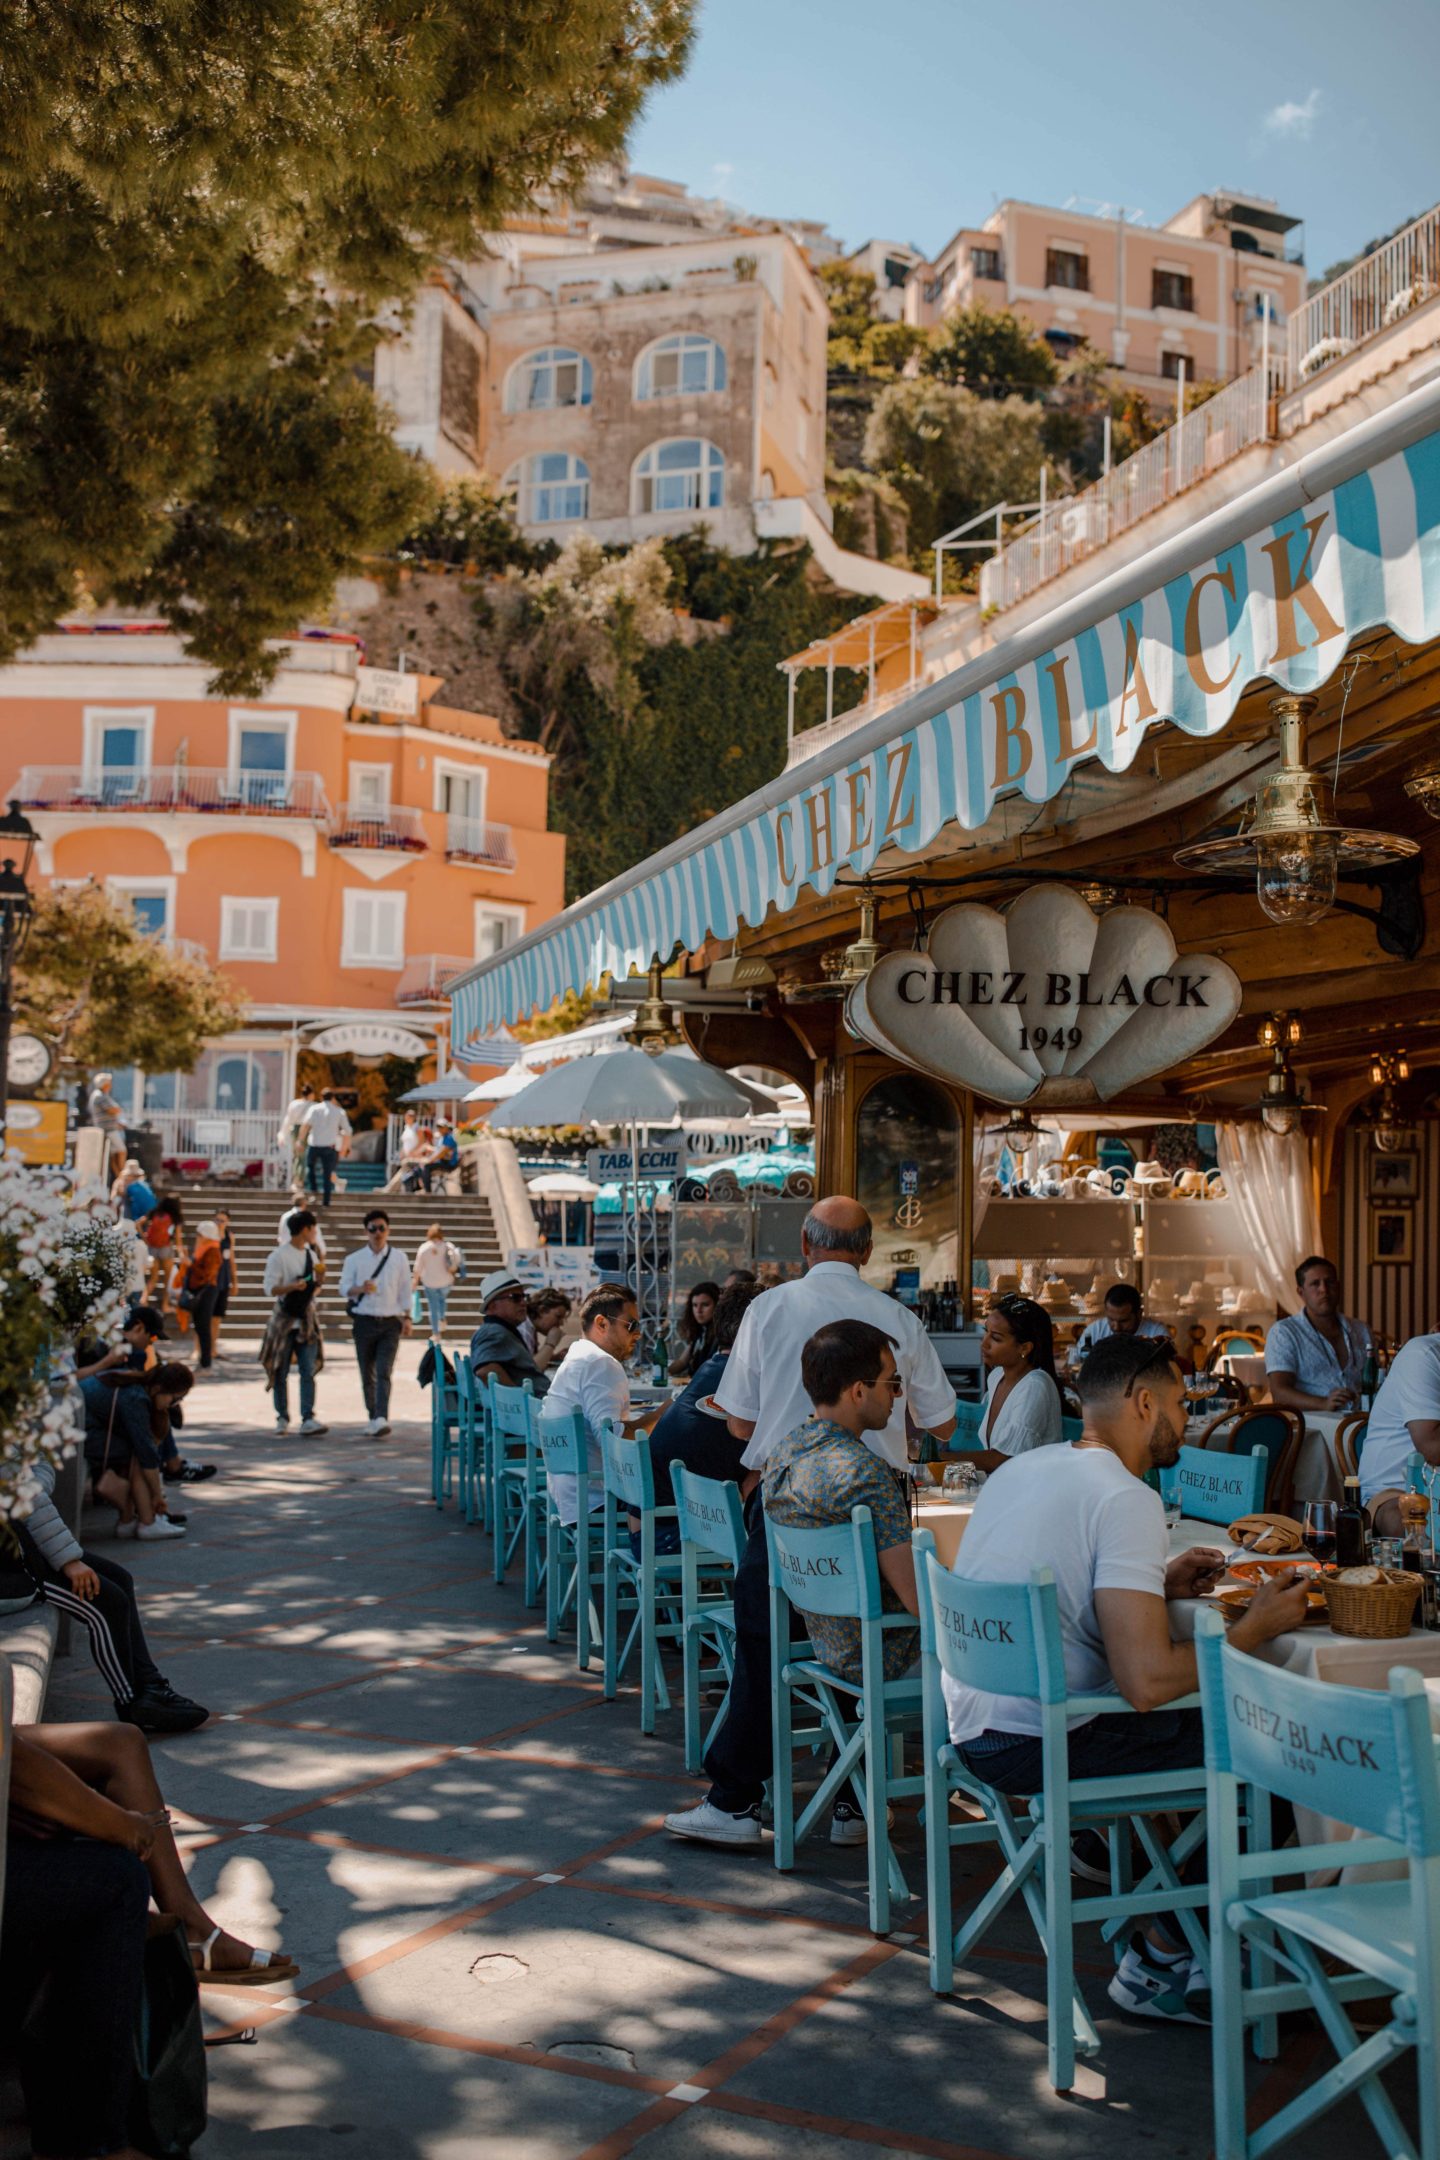 Can you travel to Positano Italy on a Budget? | How expensive is the Amalfi Coast - Dana Berez Positano Travel Guide 2019